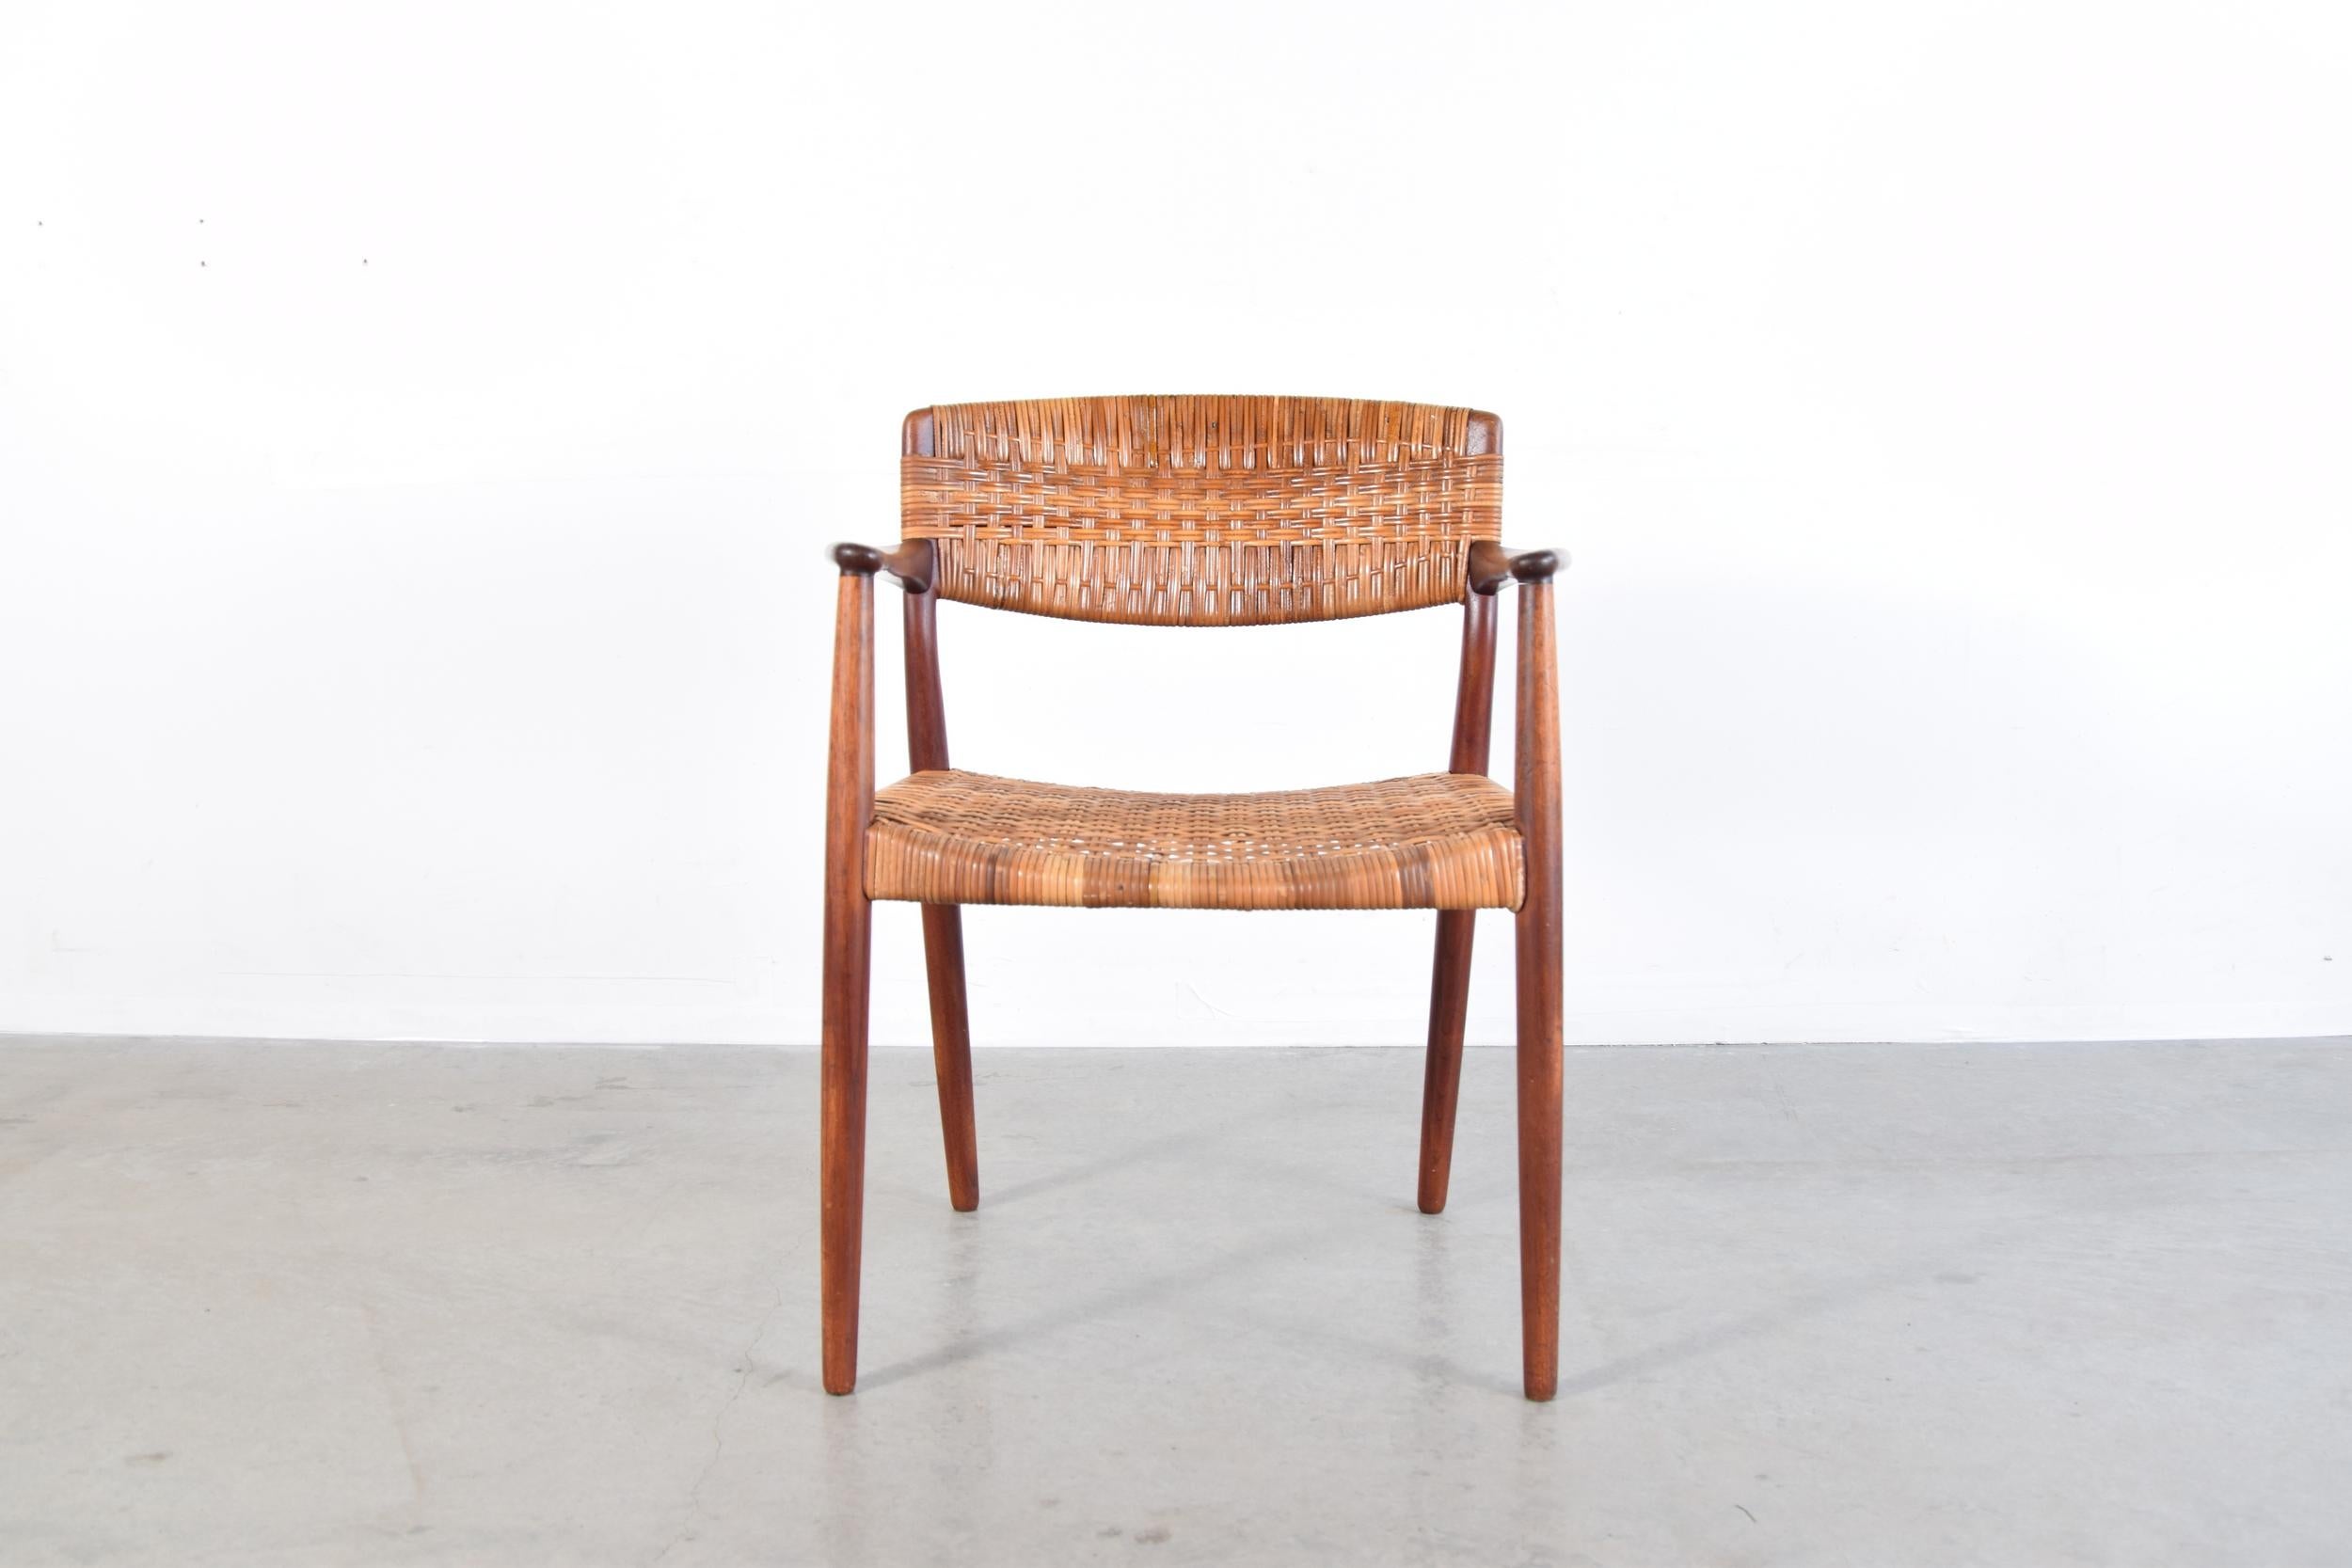 Teak and cane armchair, designed by Ejner Larsen & Aksel Bender Madsen. Produced by Willy Beck in Denmark, circa 1950s.

Arm height is 26 1/2